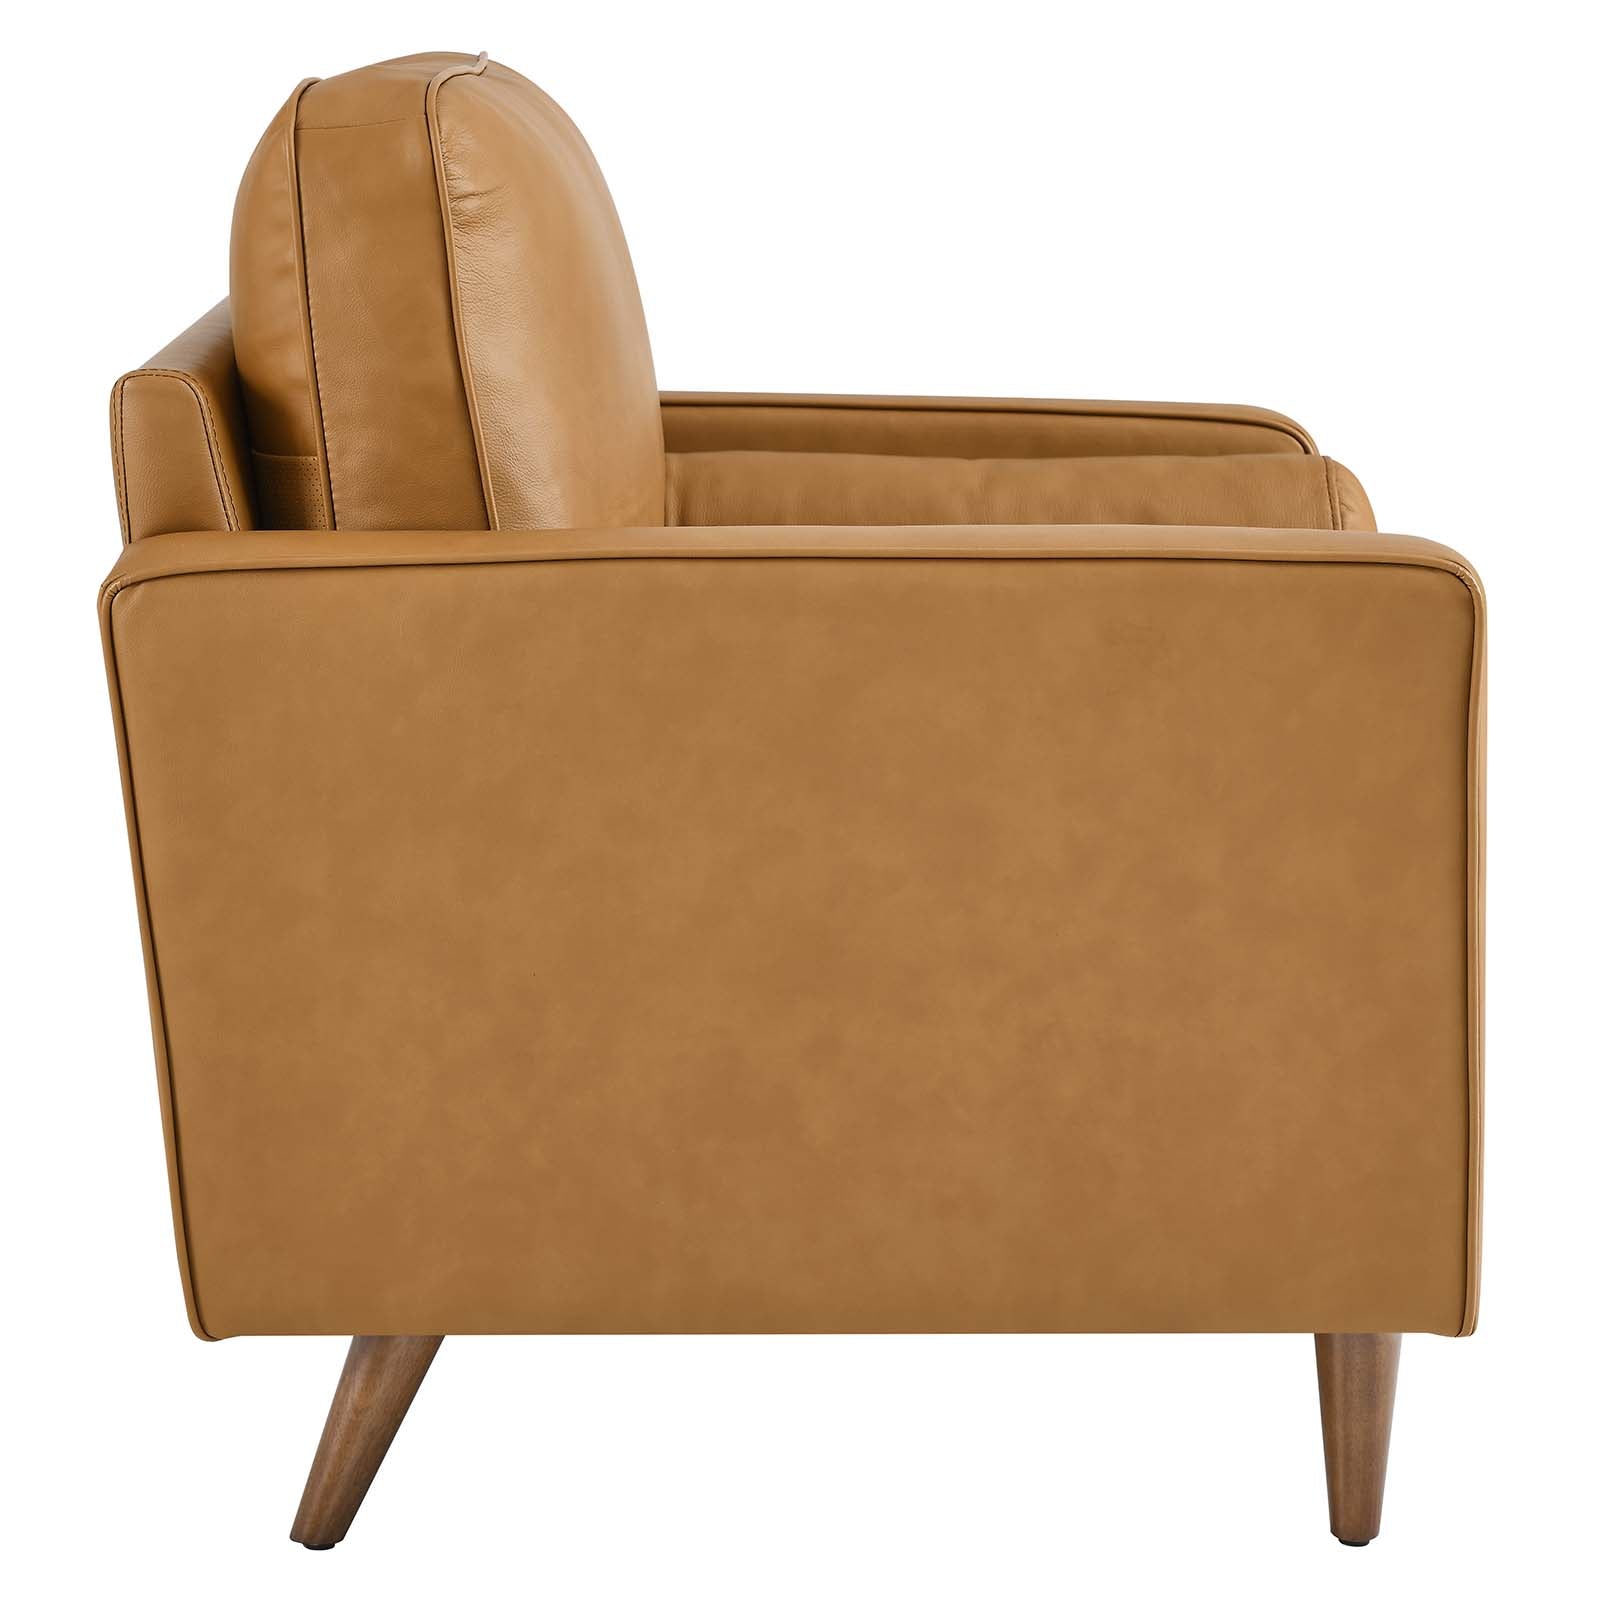 Modway Accent Chairs - Valour Leather Armchair Tan